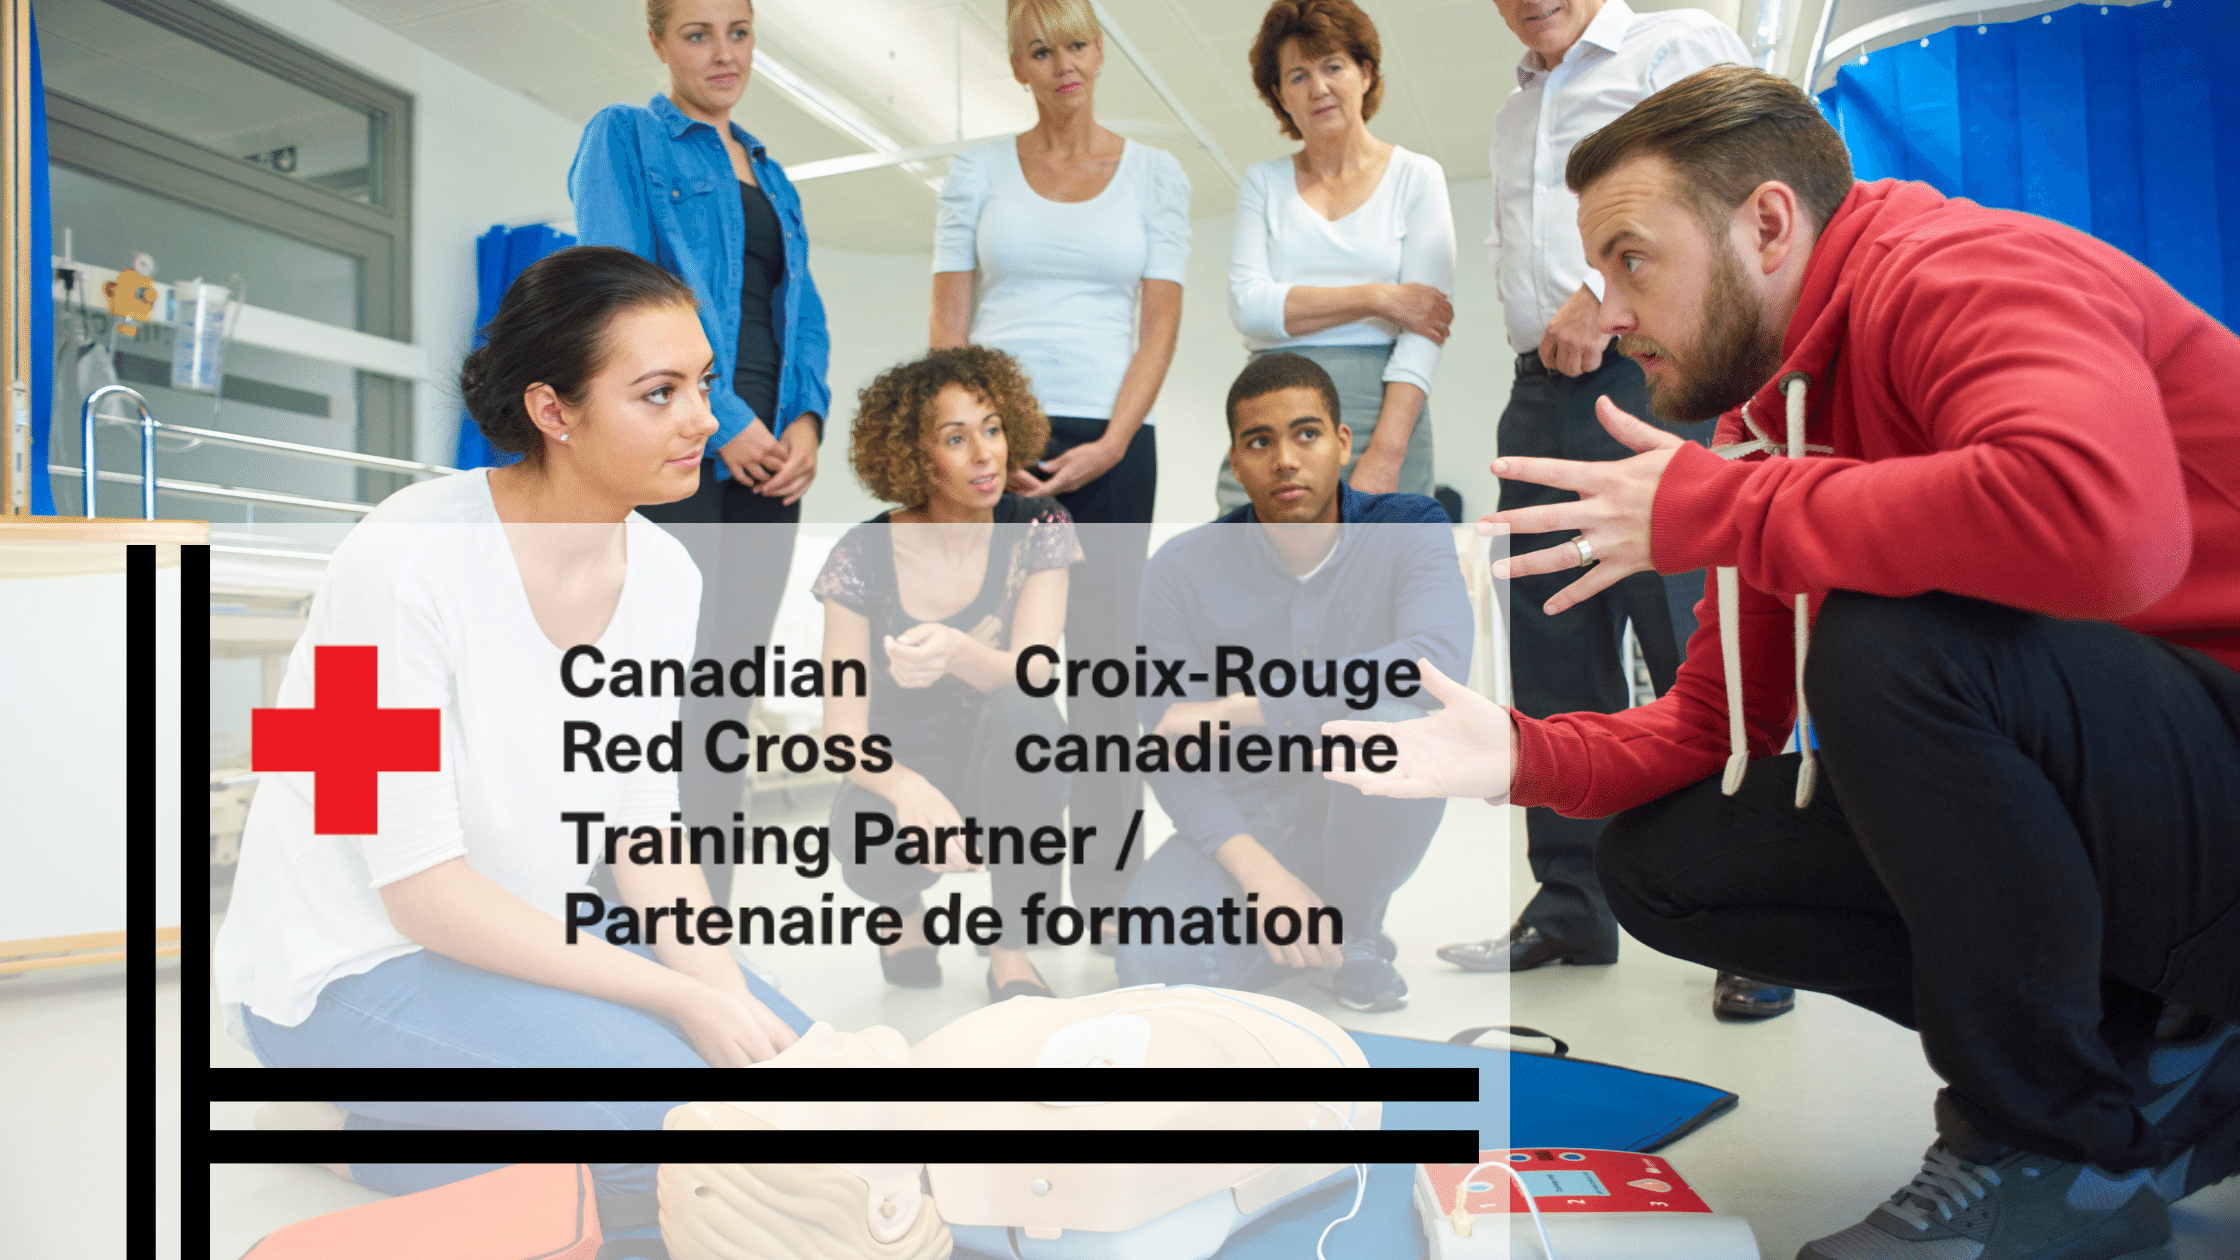 The Canadian Red Cross provides first aid services as, offering training and certification courses, to provide medical assistance to those in need.